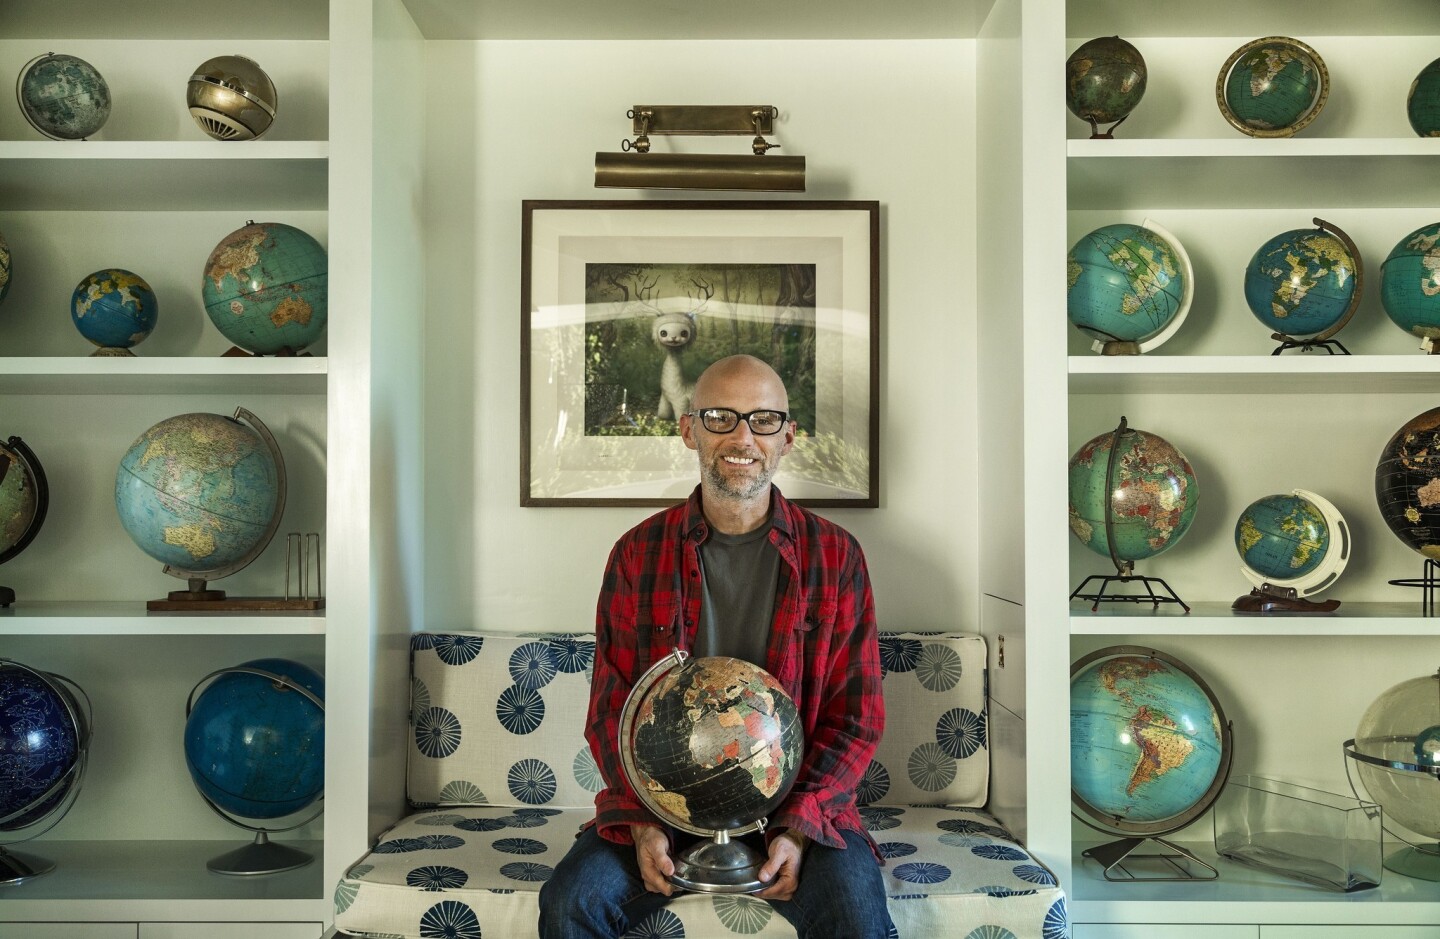 Moby holds his first globe, which he purchased as a child shopping with his mother at a thrift store. He collects vintage globes that show country place names that have disappeared into history, such as Rhodesia and Indochina. "It's an object lesson in impermanence," he says.